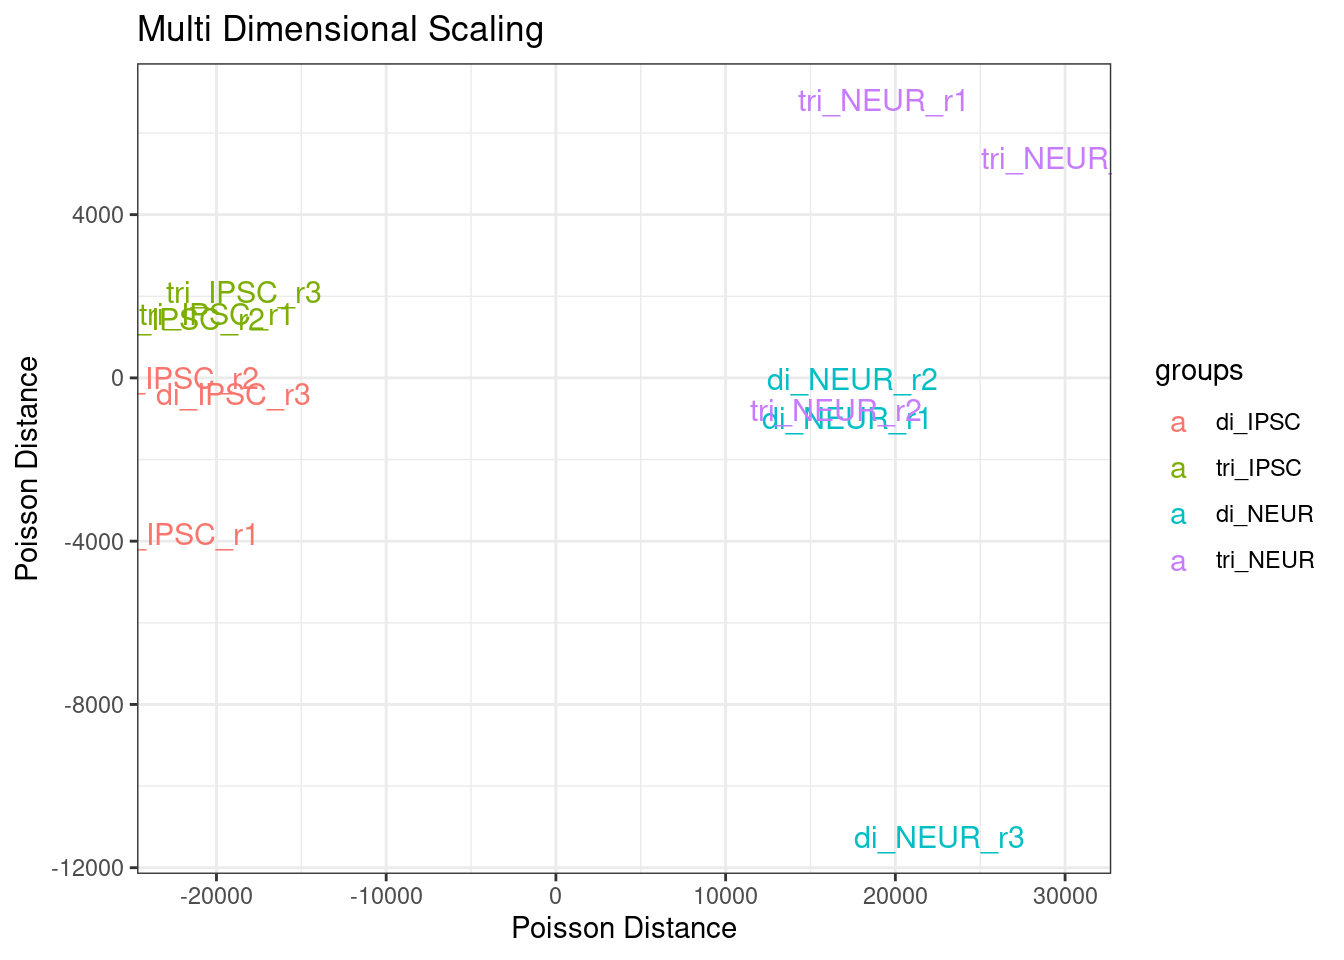 Multi Dimensional Scaling - Poisson Distance for all samples